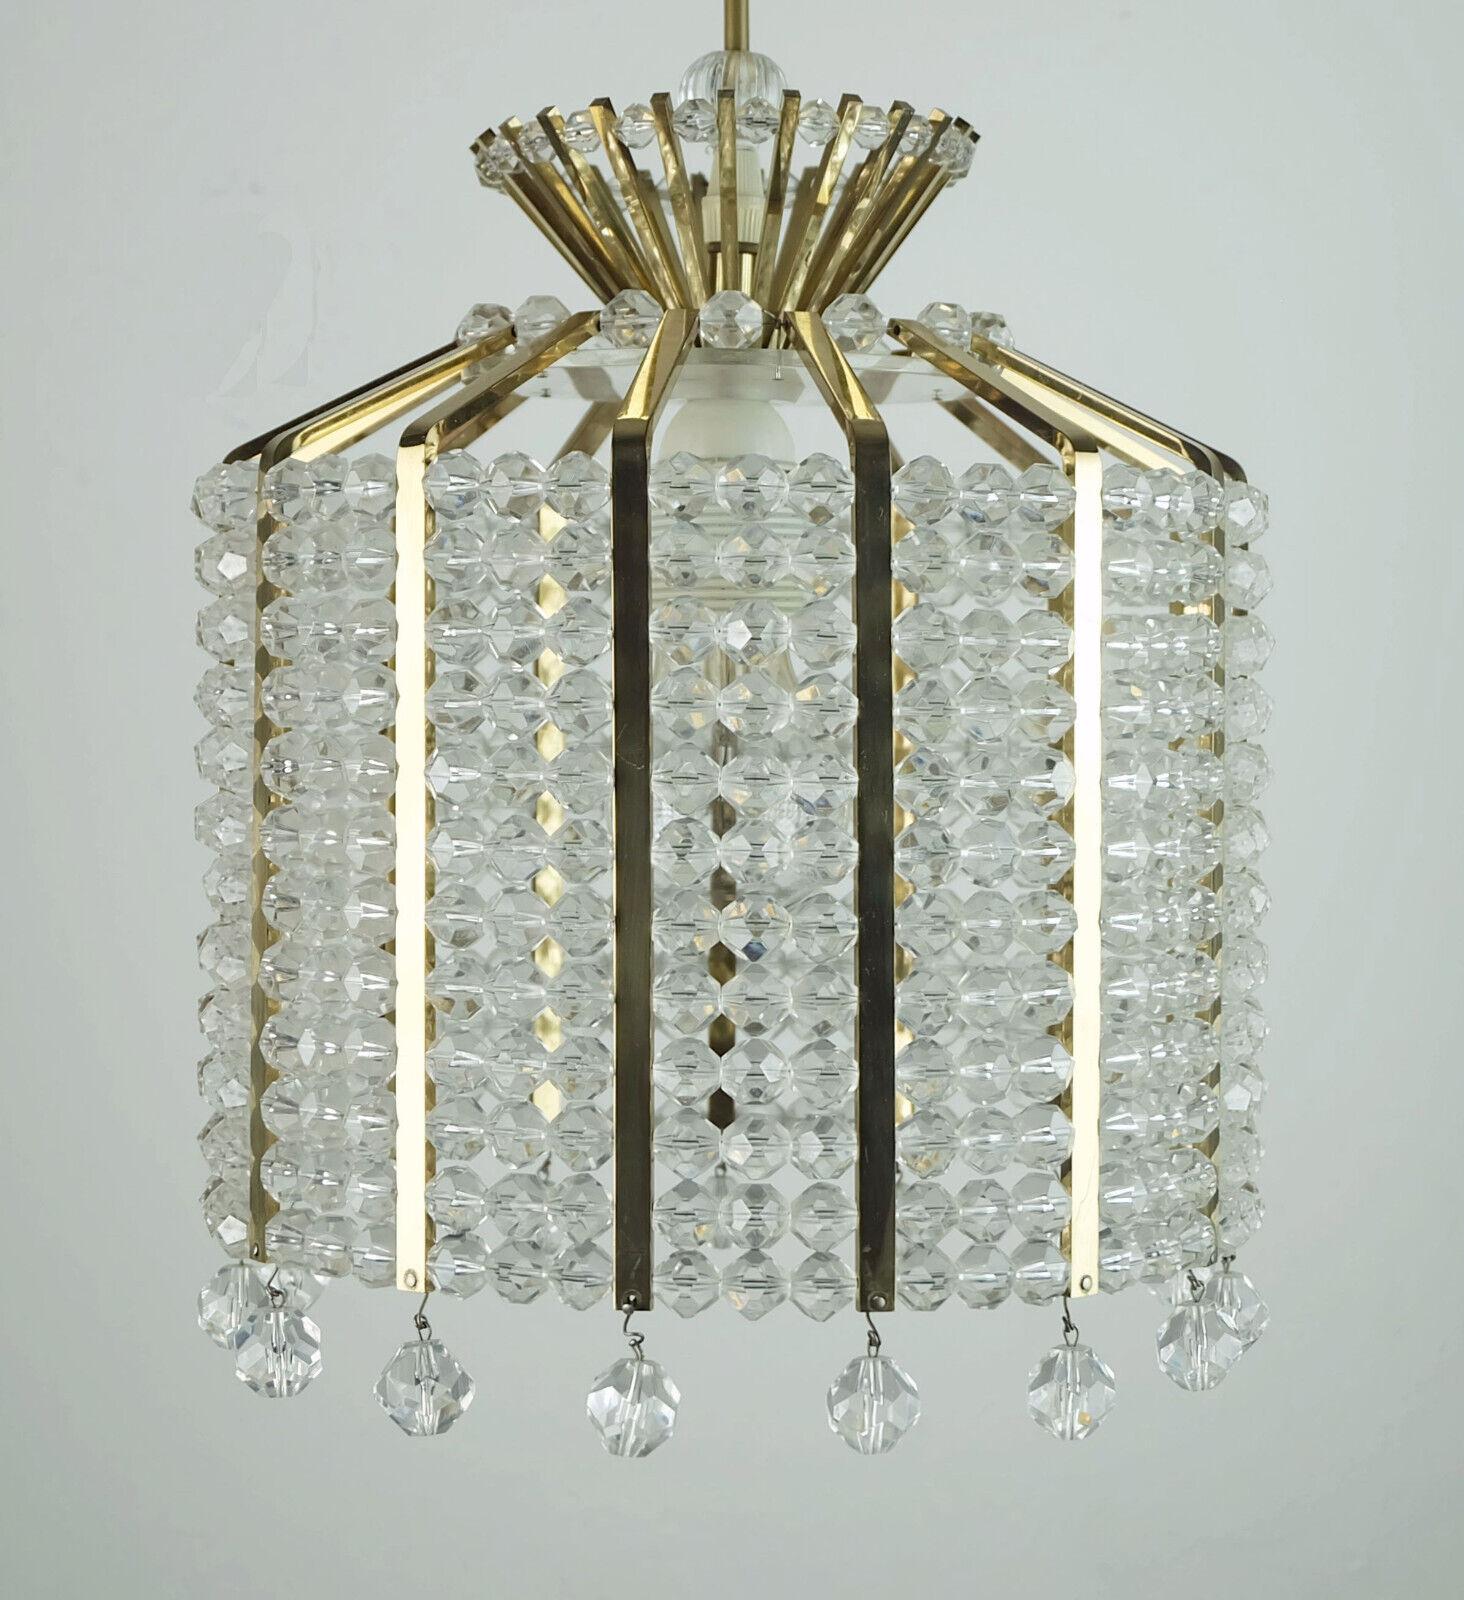 1960s PENDANT LIGHT brass and acrylic hollywood regency style For Sale 3